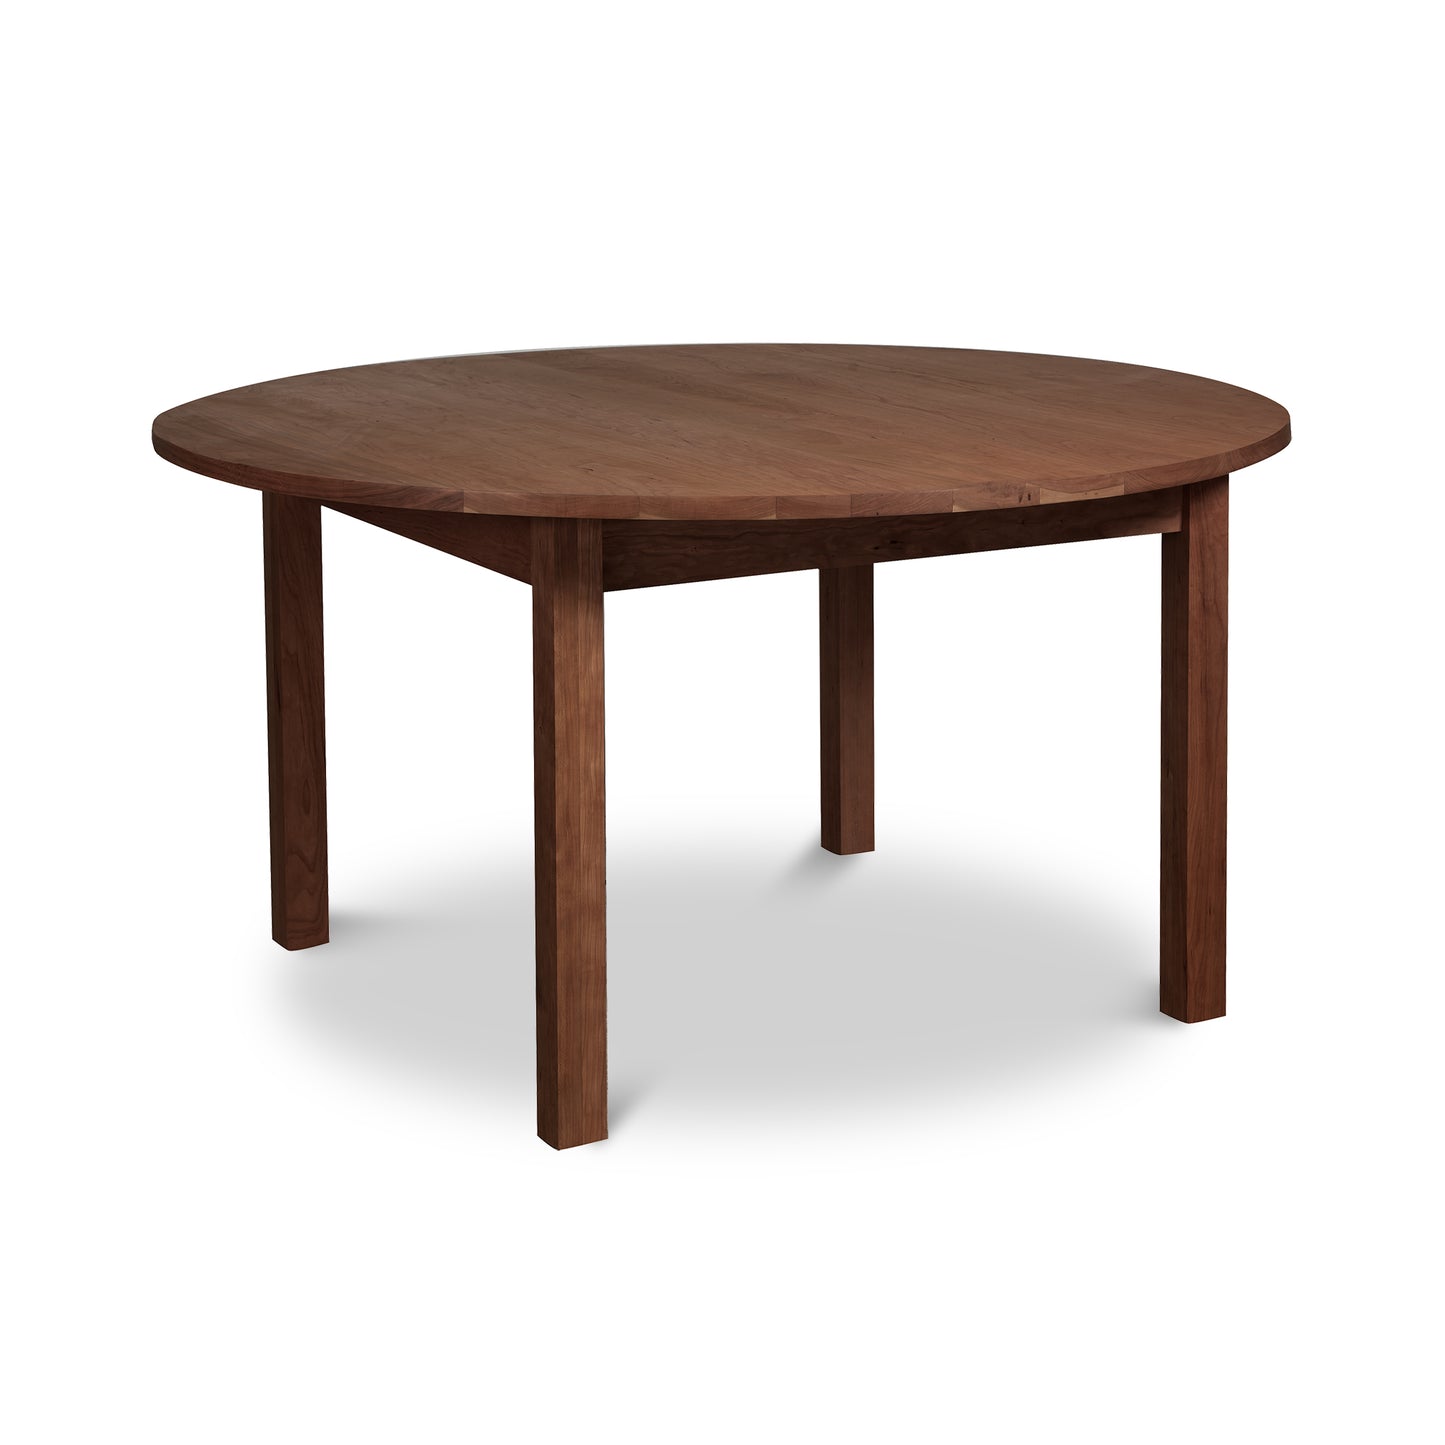 A Burlington Shaker Round Solid Top Dining Table by Vermont Furniture Designs with four legs, isolated on a white background.